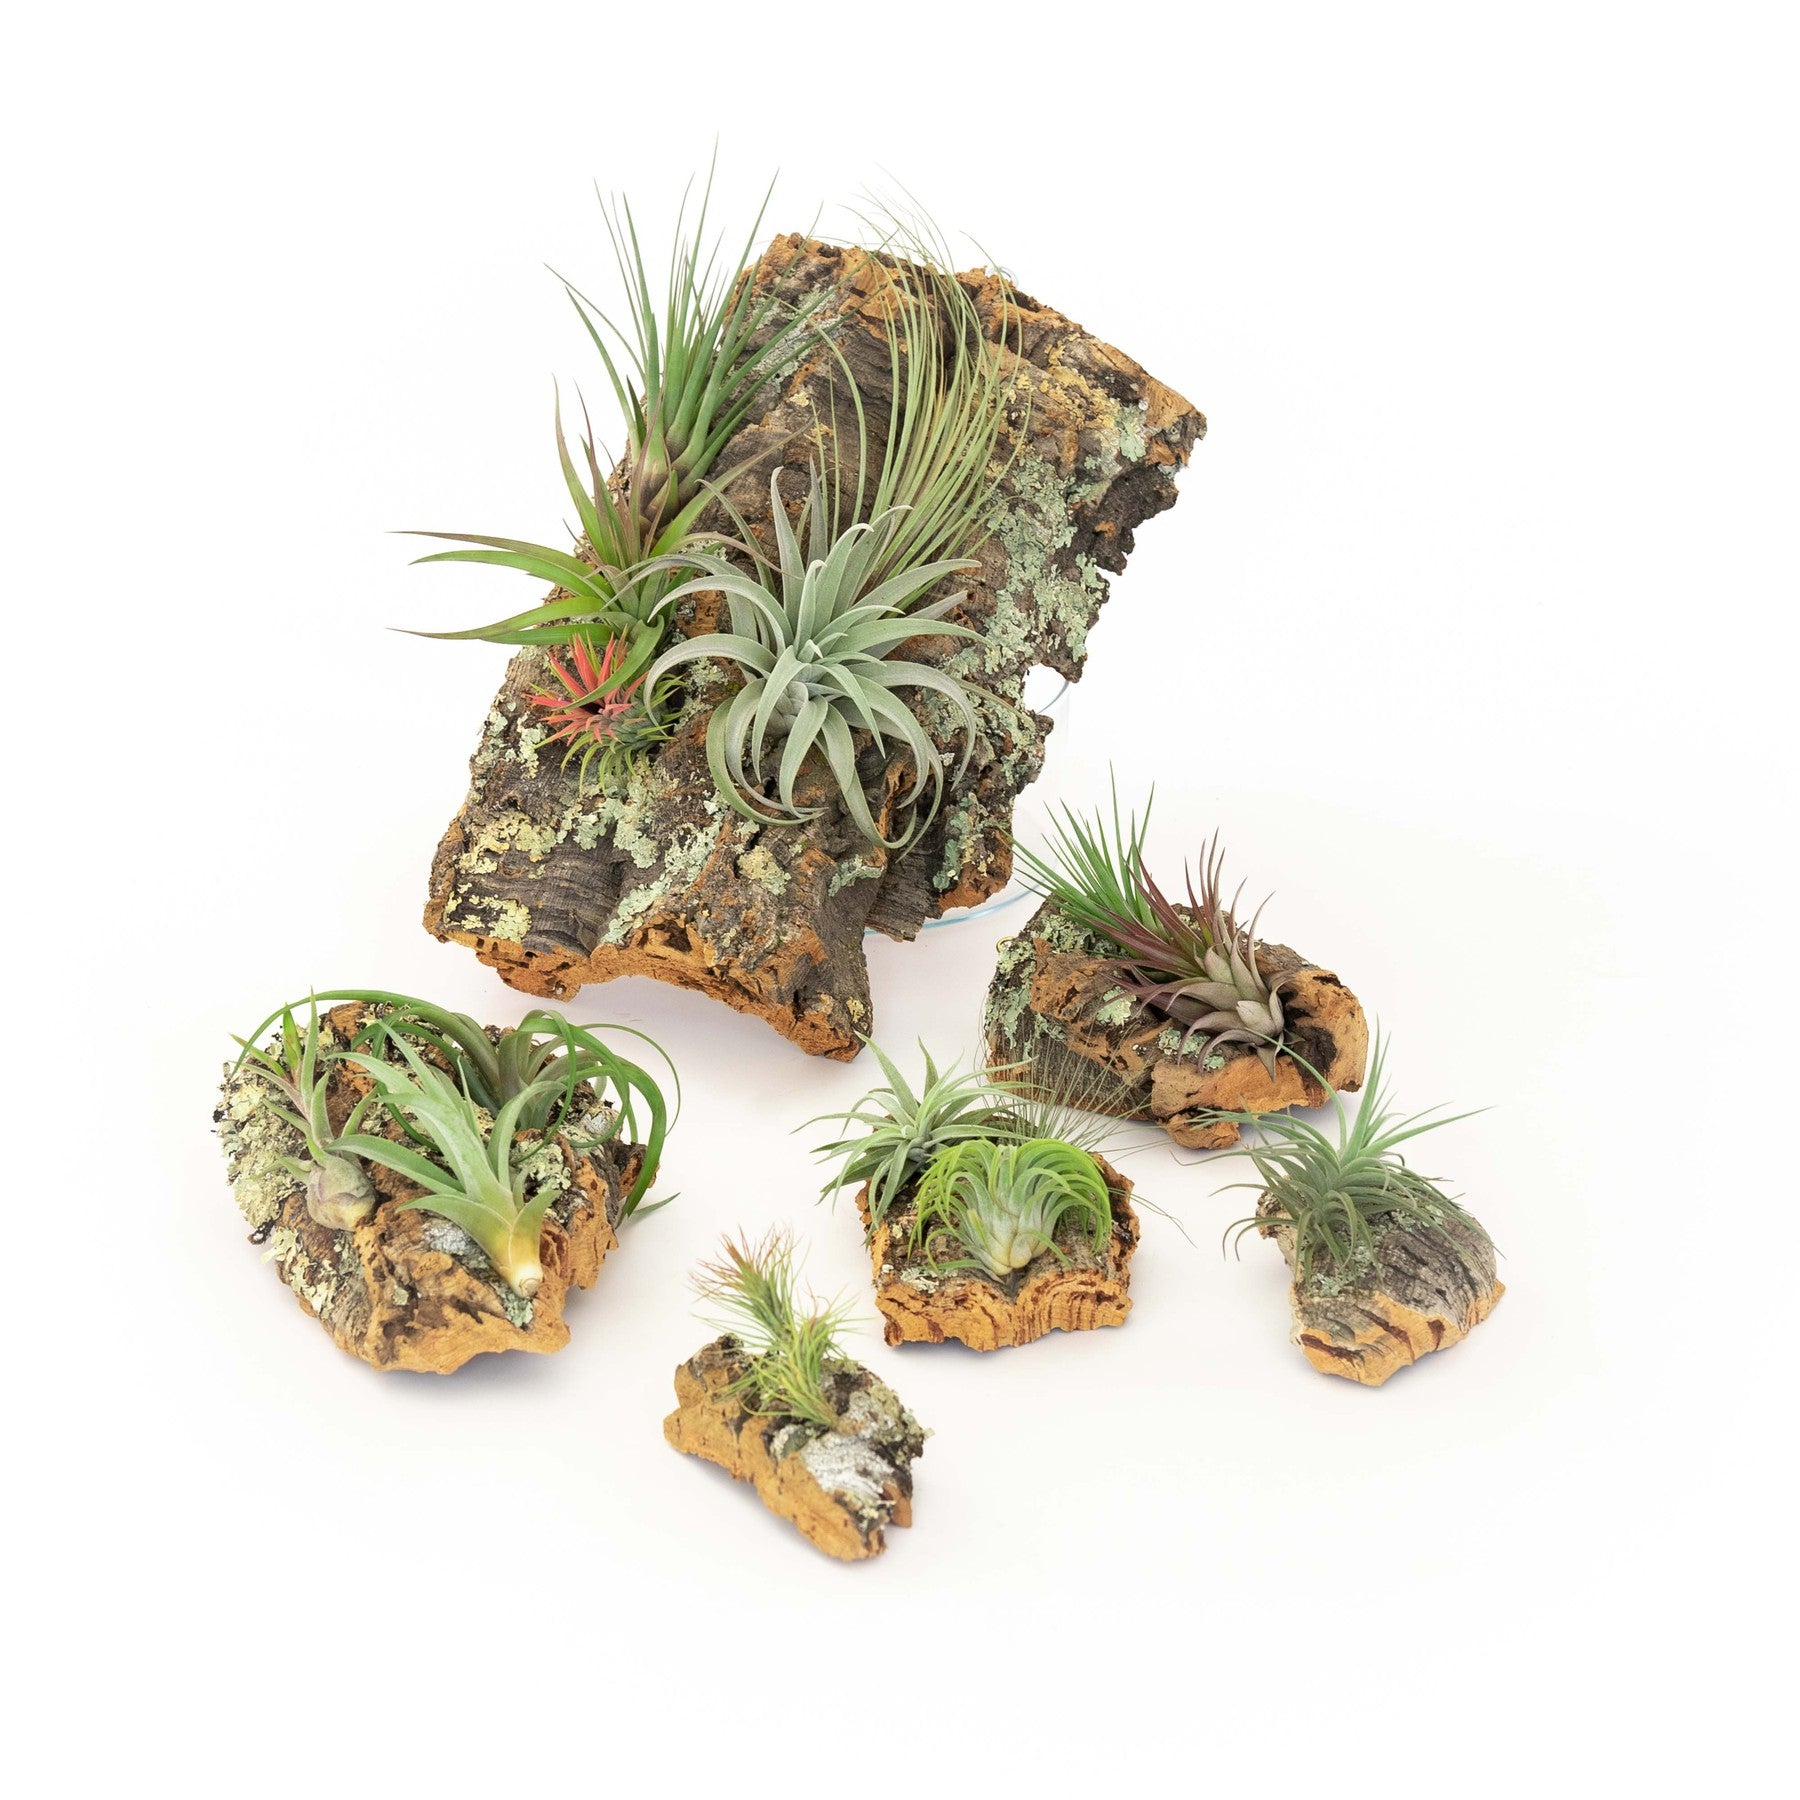 Cork Bark Chunk Display with Assorted Tillandsia Air Plant - Approximately 2 x 4 Inches-terrarium-The Succulent Source